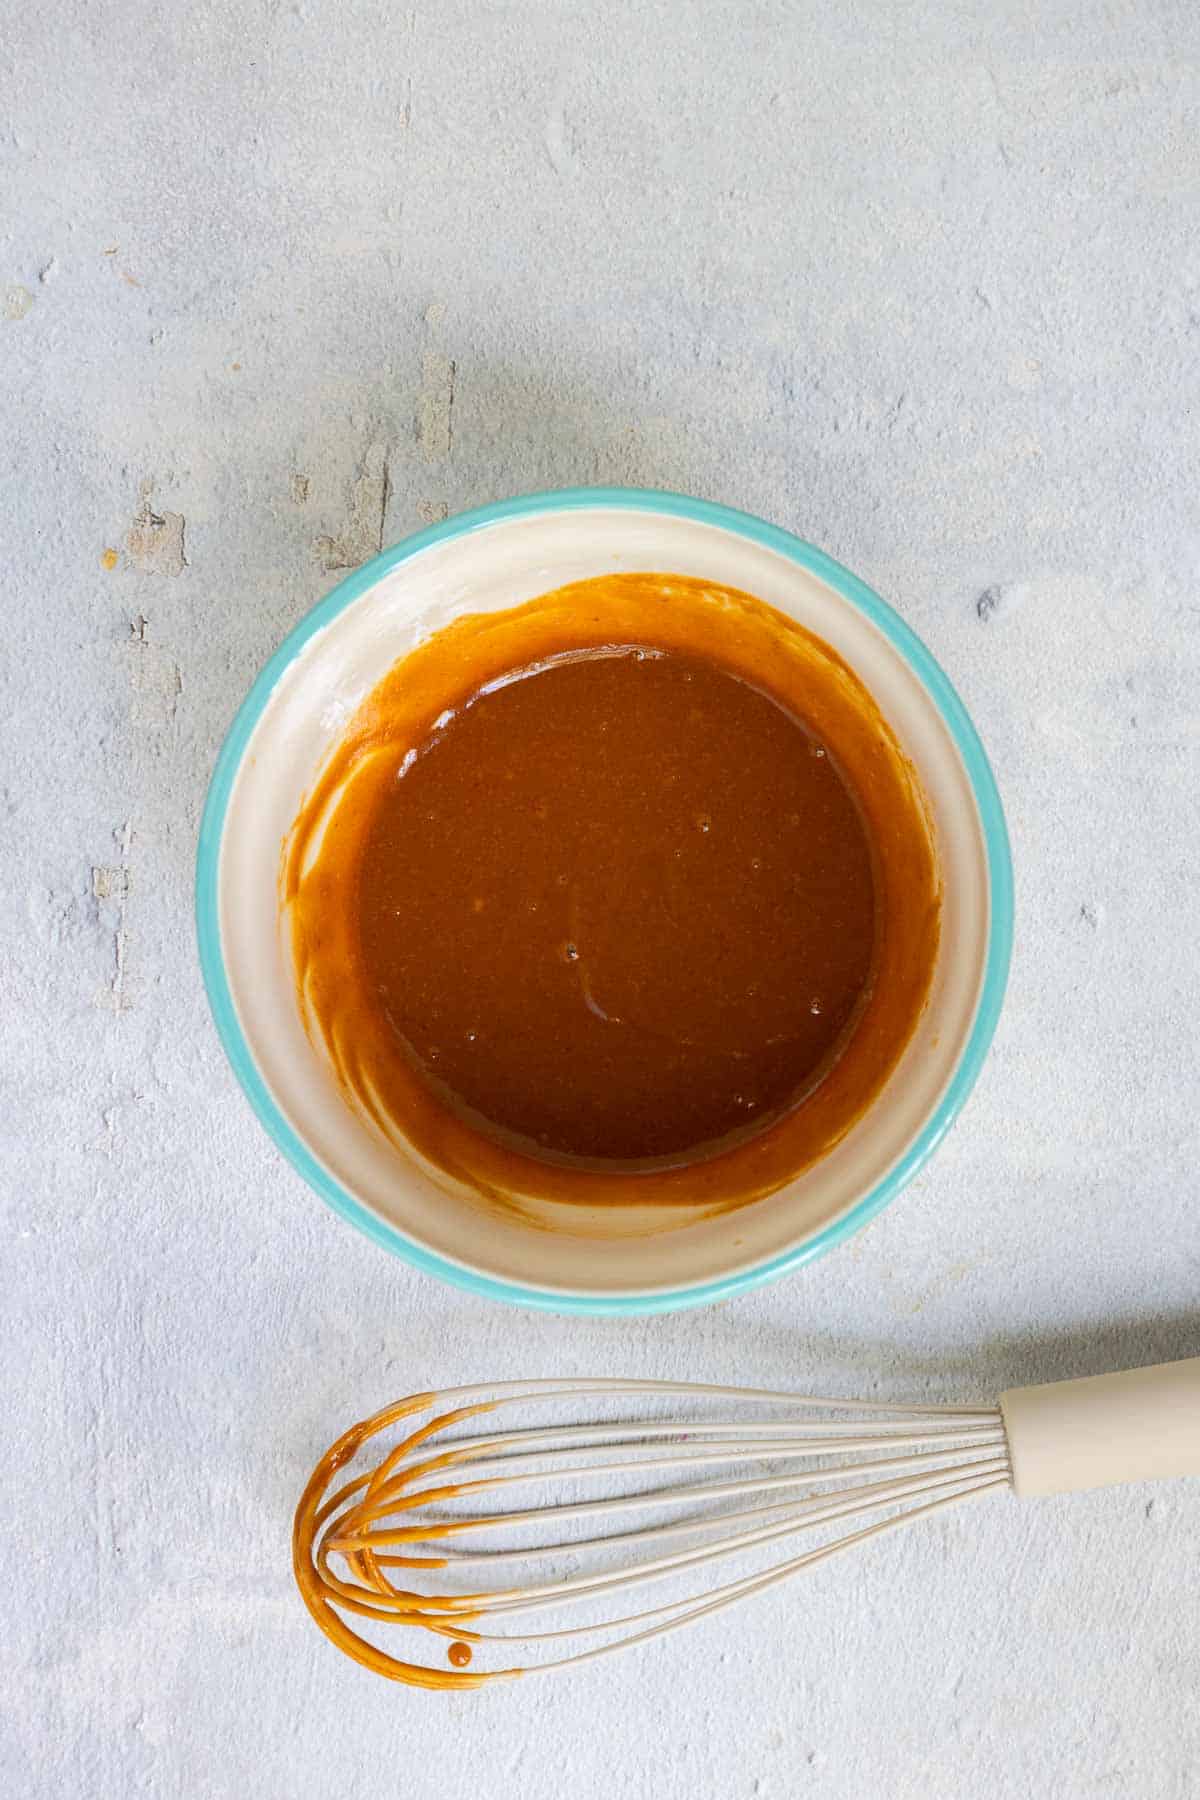 Peanut sauce whisked until smooth in a small mixing bowl.